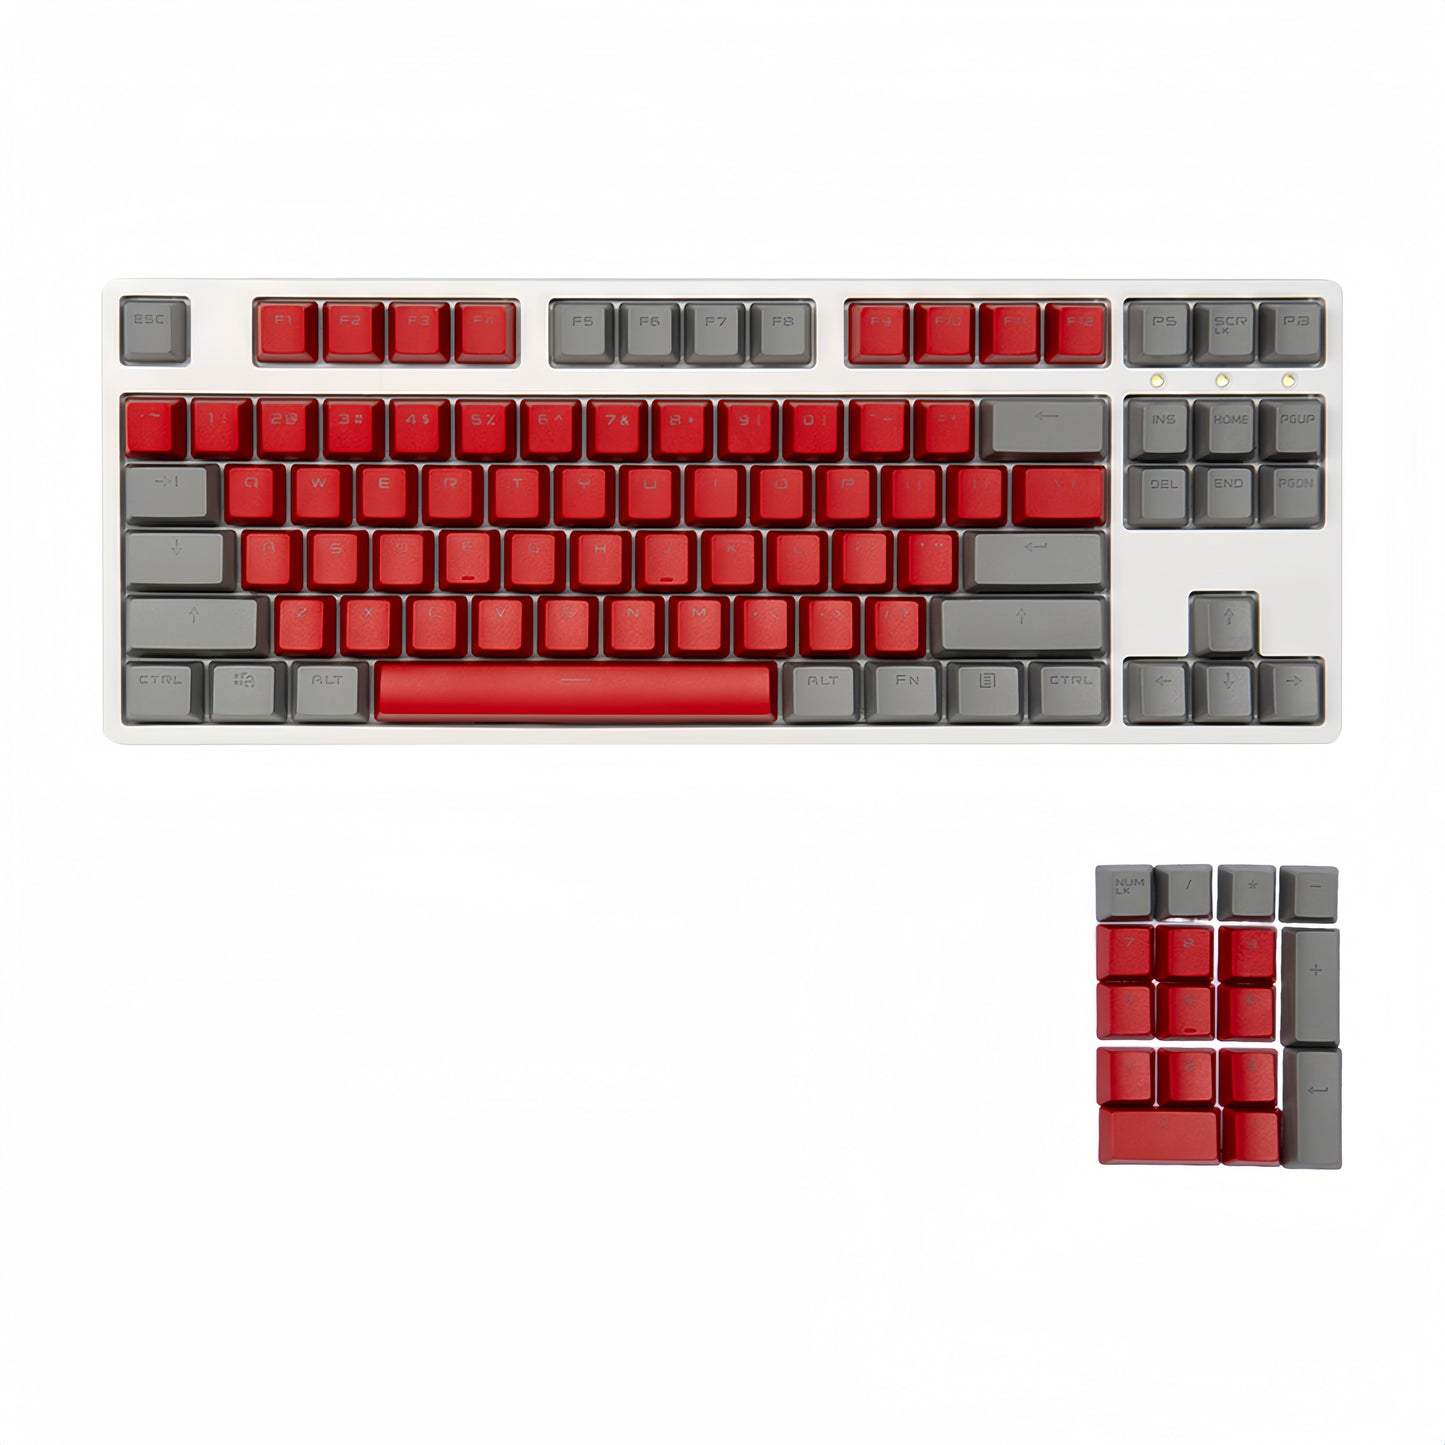 OEM PBT Dye-Sub Keycap PBT Keycap  Set - Red and gray dual color